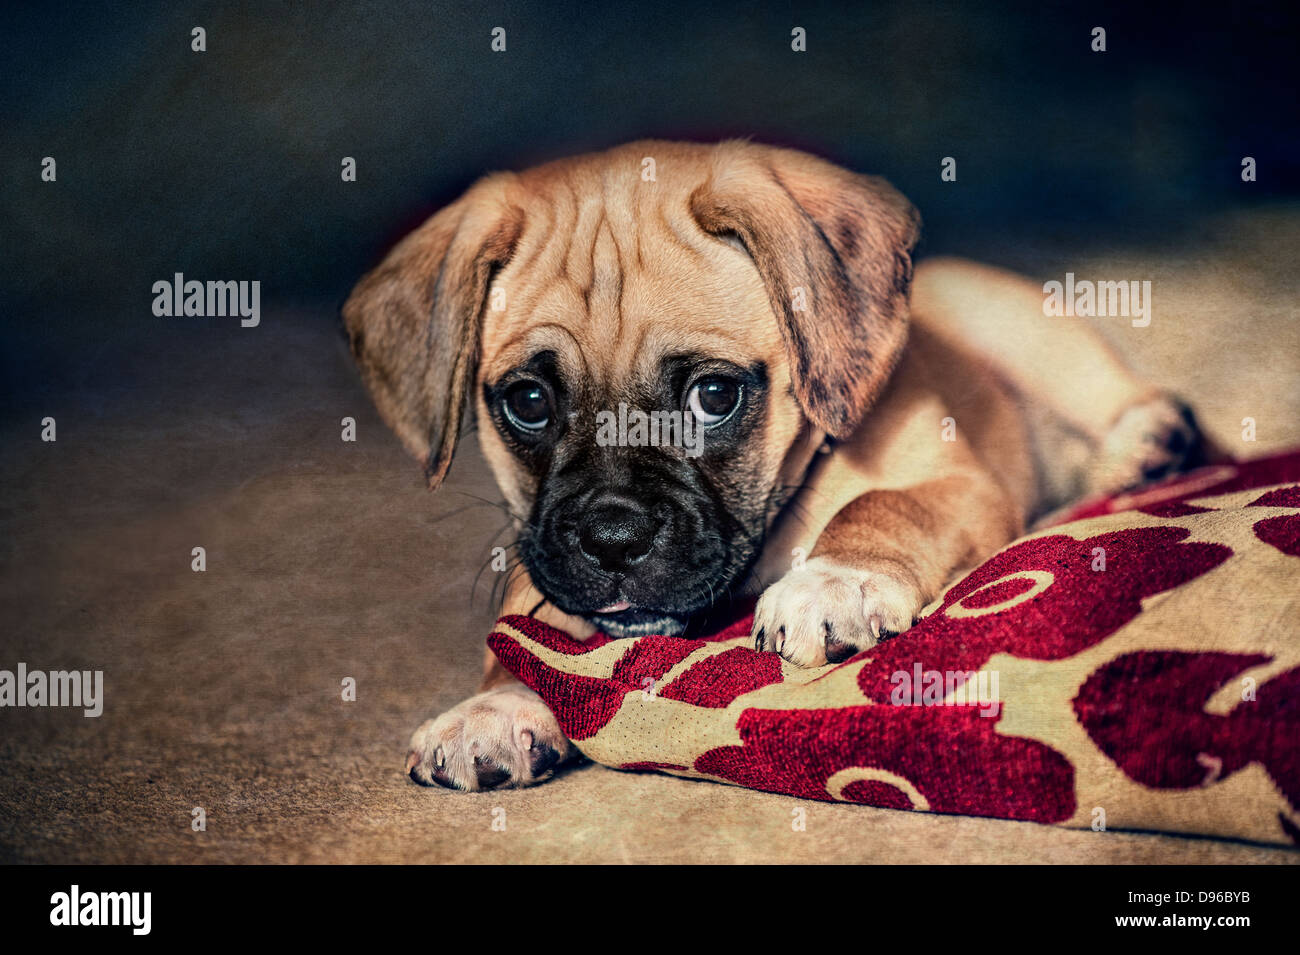 Mischievous puggle puppy playing with a cushion Stock Photo